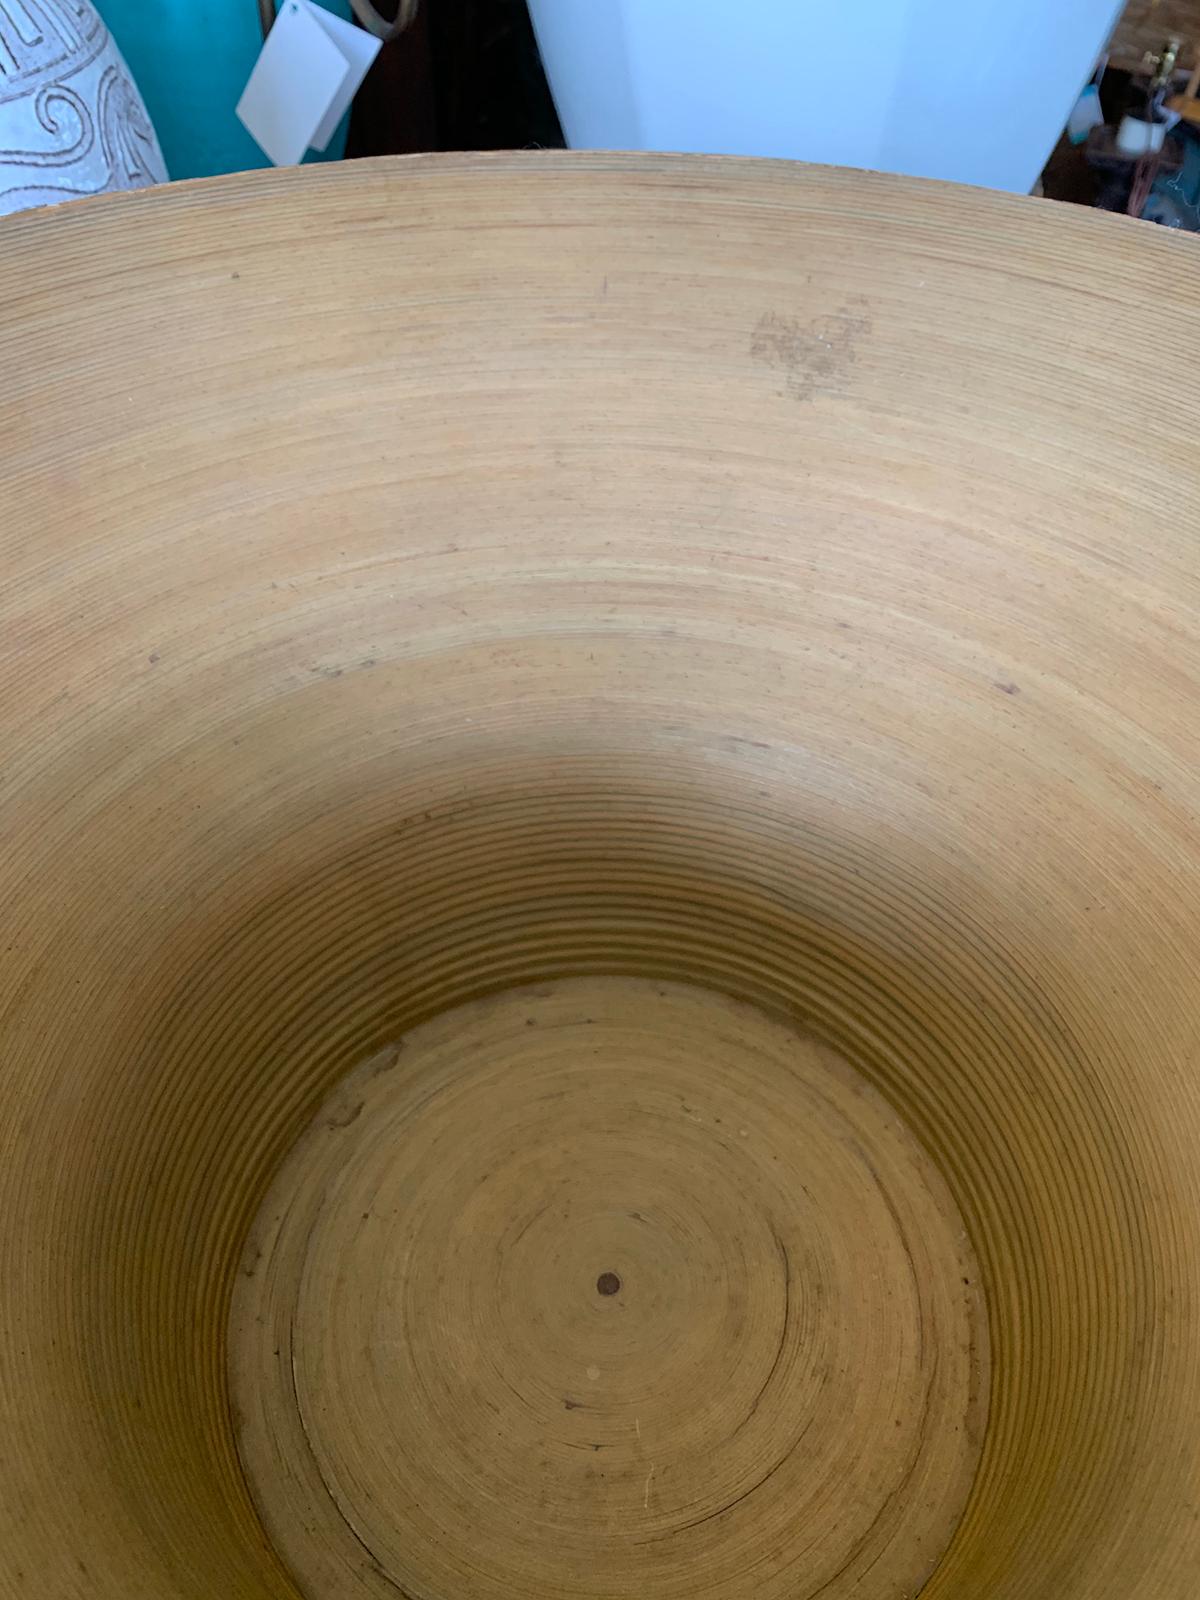 Mid-20th Century Japanese Bowl, Labeled 